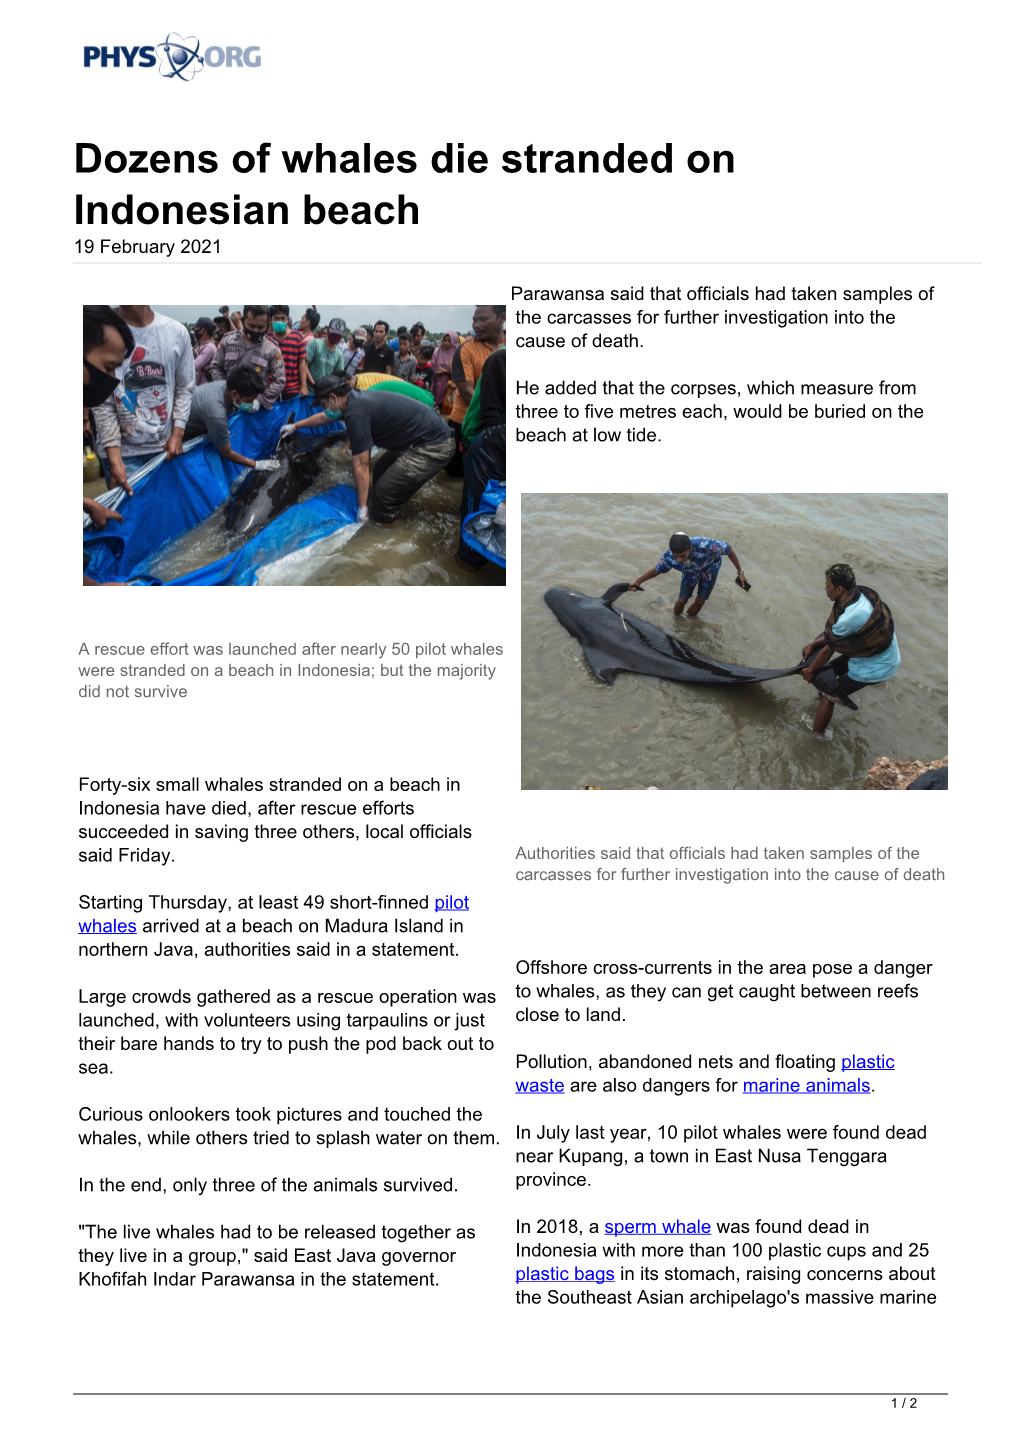 Dozens of Whales Die Stranded on Indonesian Beach 19 February 2021